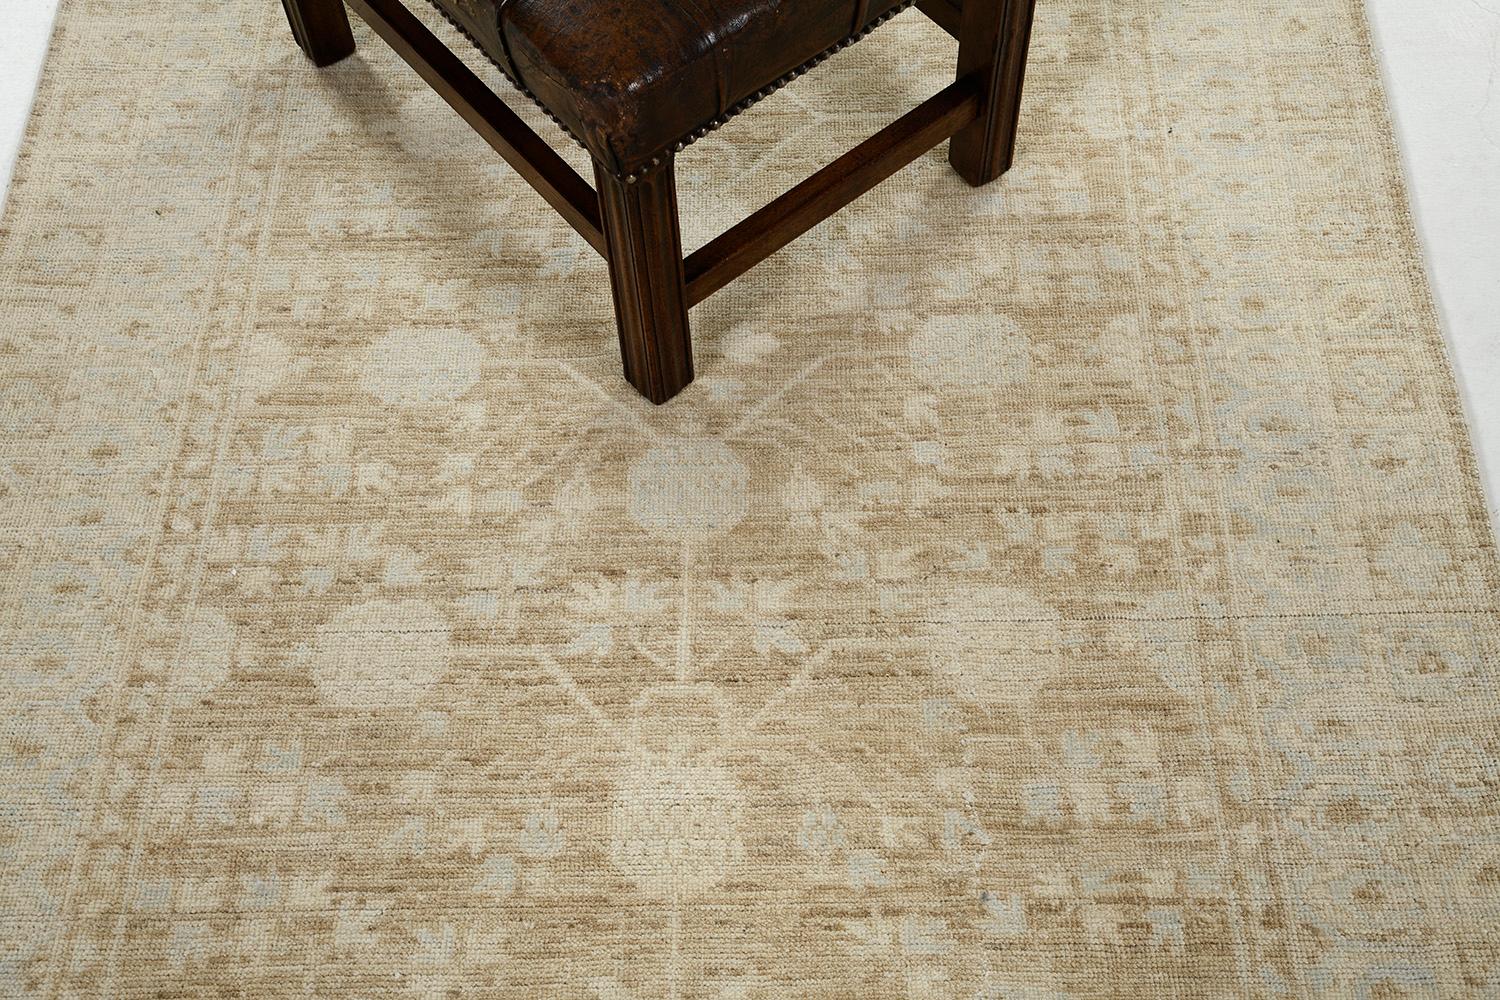 An impressive pile-woven wool Khotan design from our collection has come and flexed its versatility.  Series of medallions and connecting motifs in the muted brown and sky blue theme dominate the entire pattern of the rug. Beautiful floral bands are